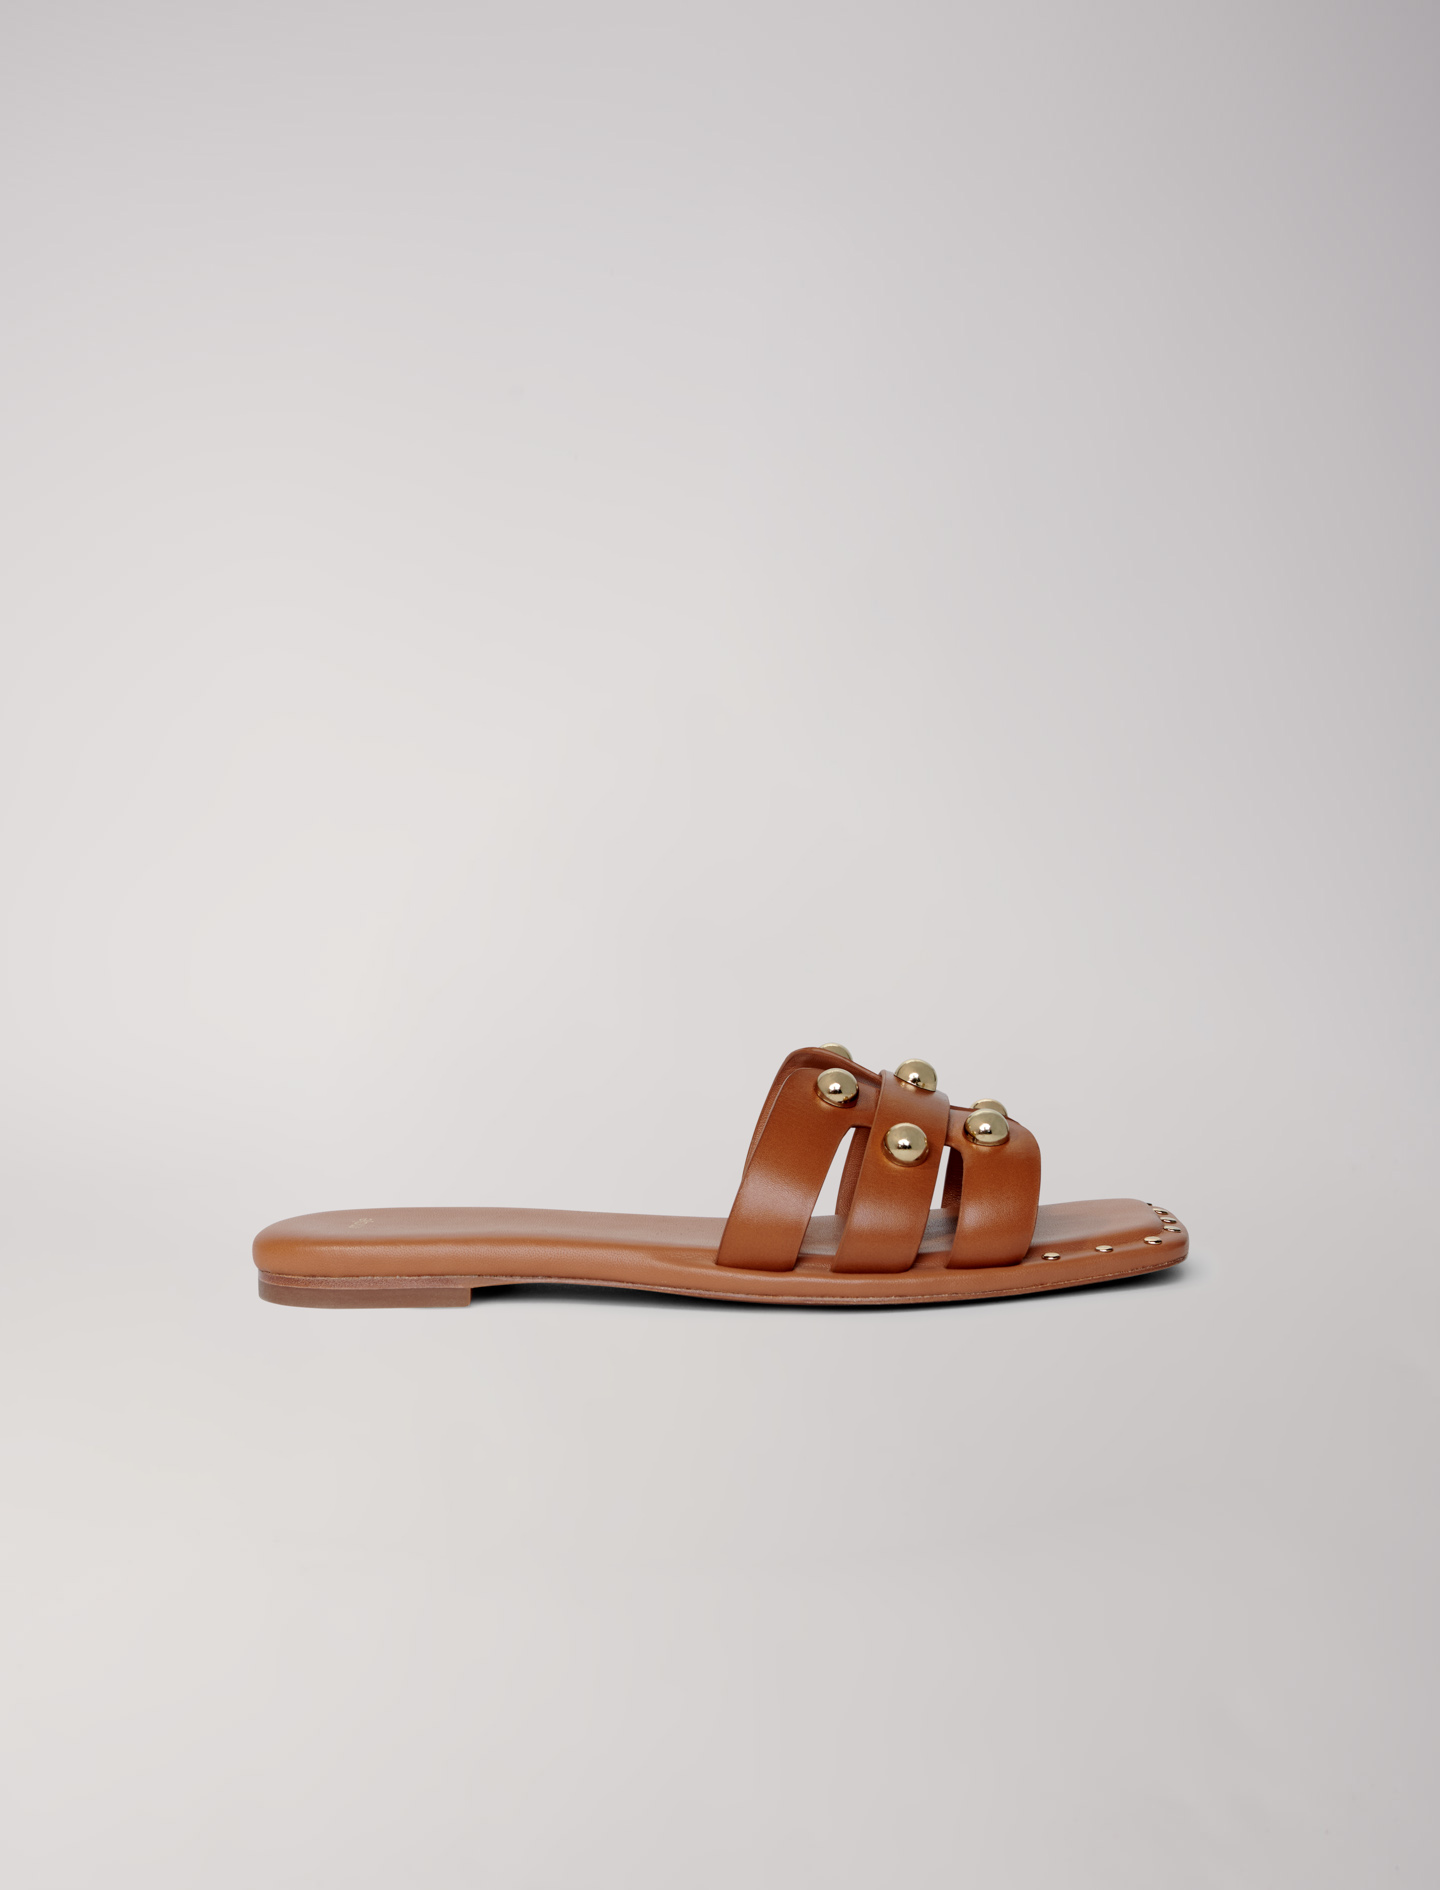 Maje Woman's copper Jewellery: Studded leather mules for Spring/Summer, in color Camel / Brown